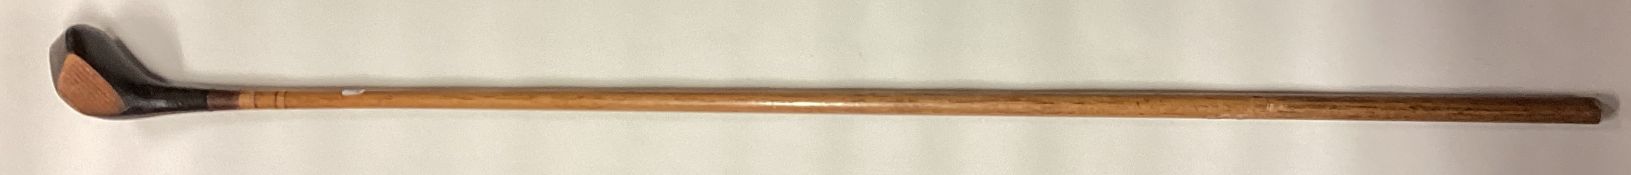 An old tapering wooden golf club.